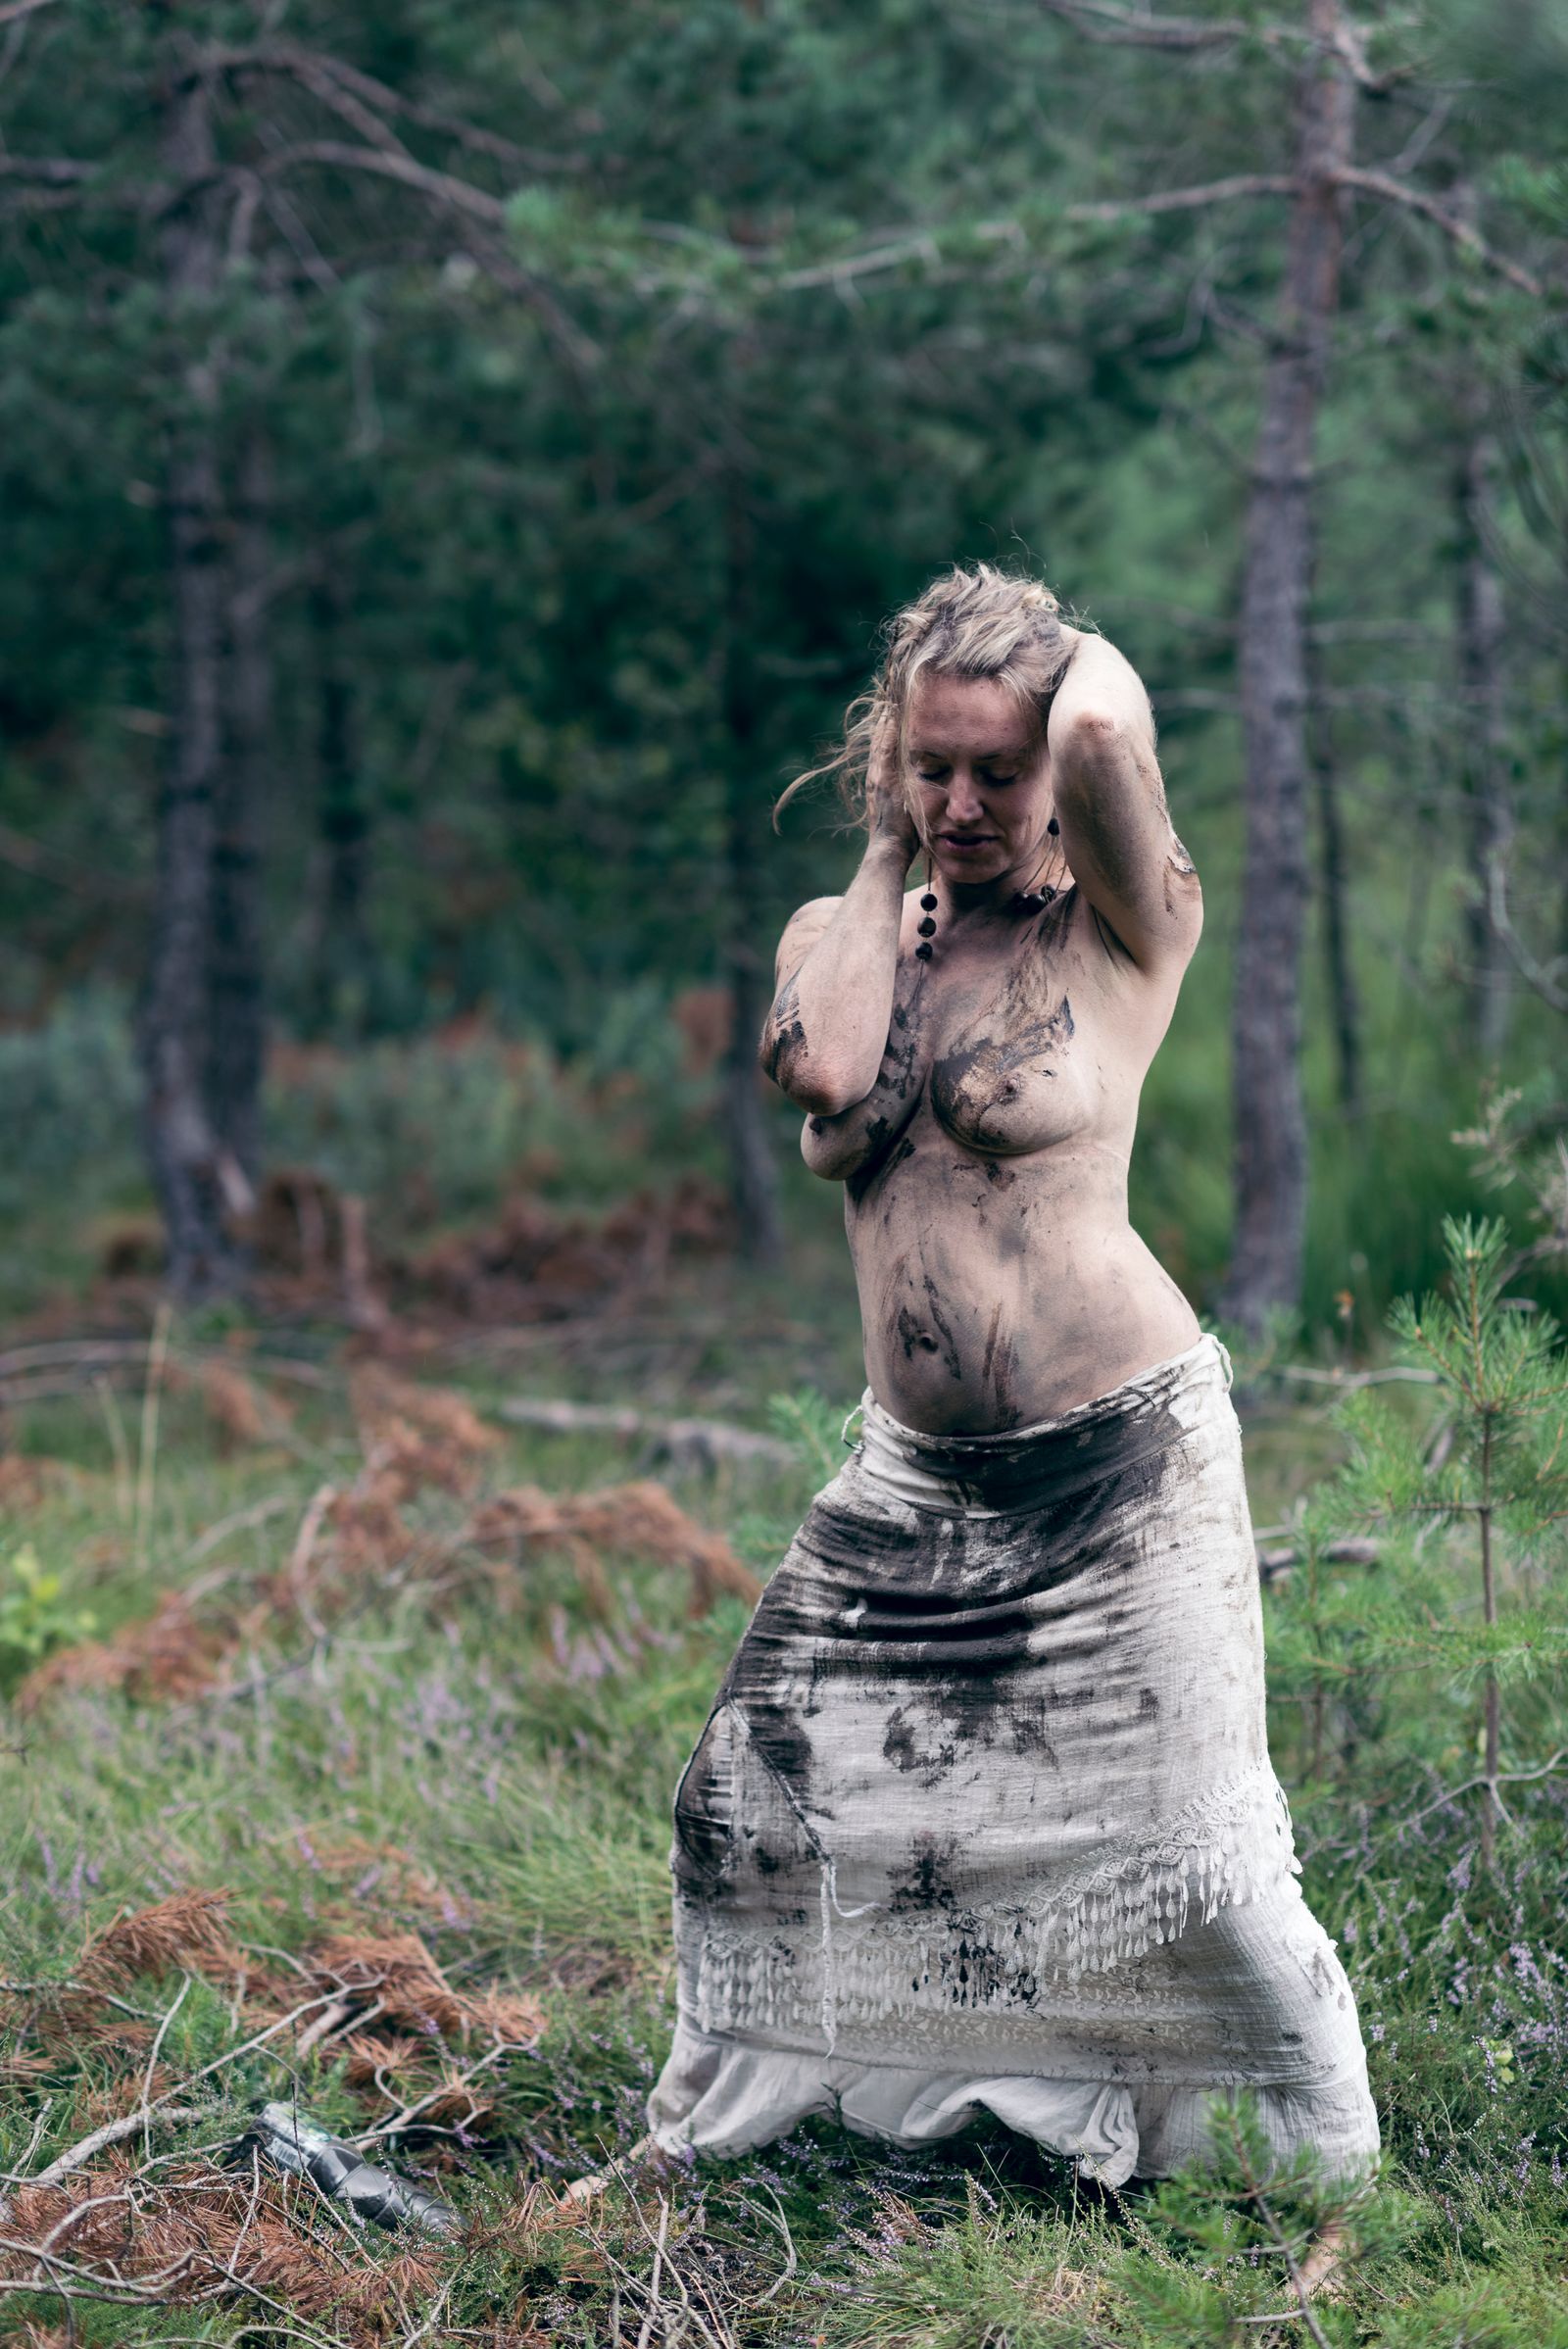 © Ingrid Firmhofer - GROUNDING - "To feel the nature, the forest, the grounding, the body." masseur, Germany